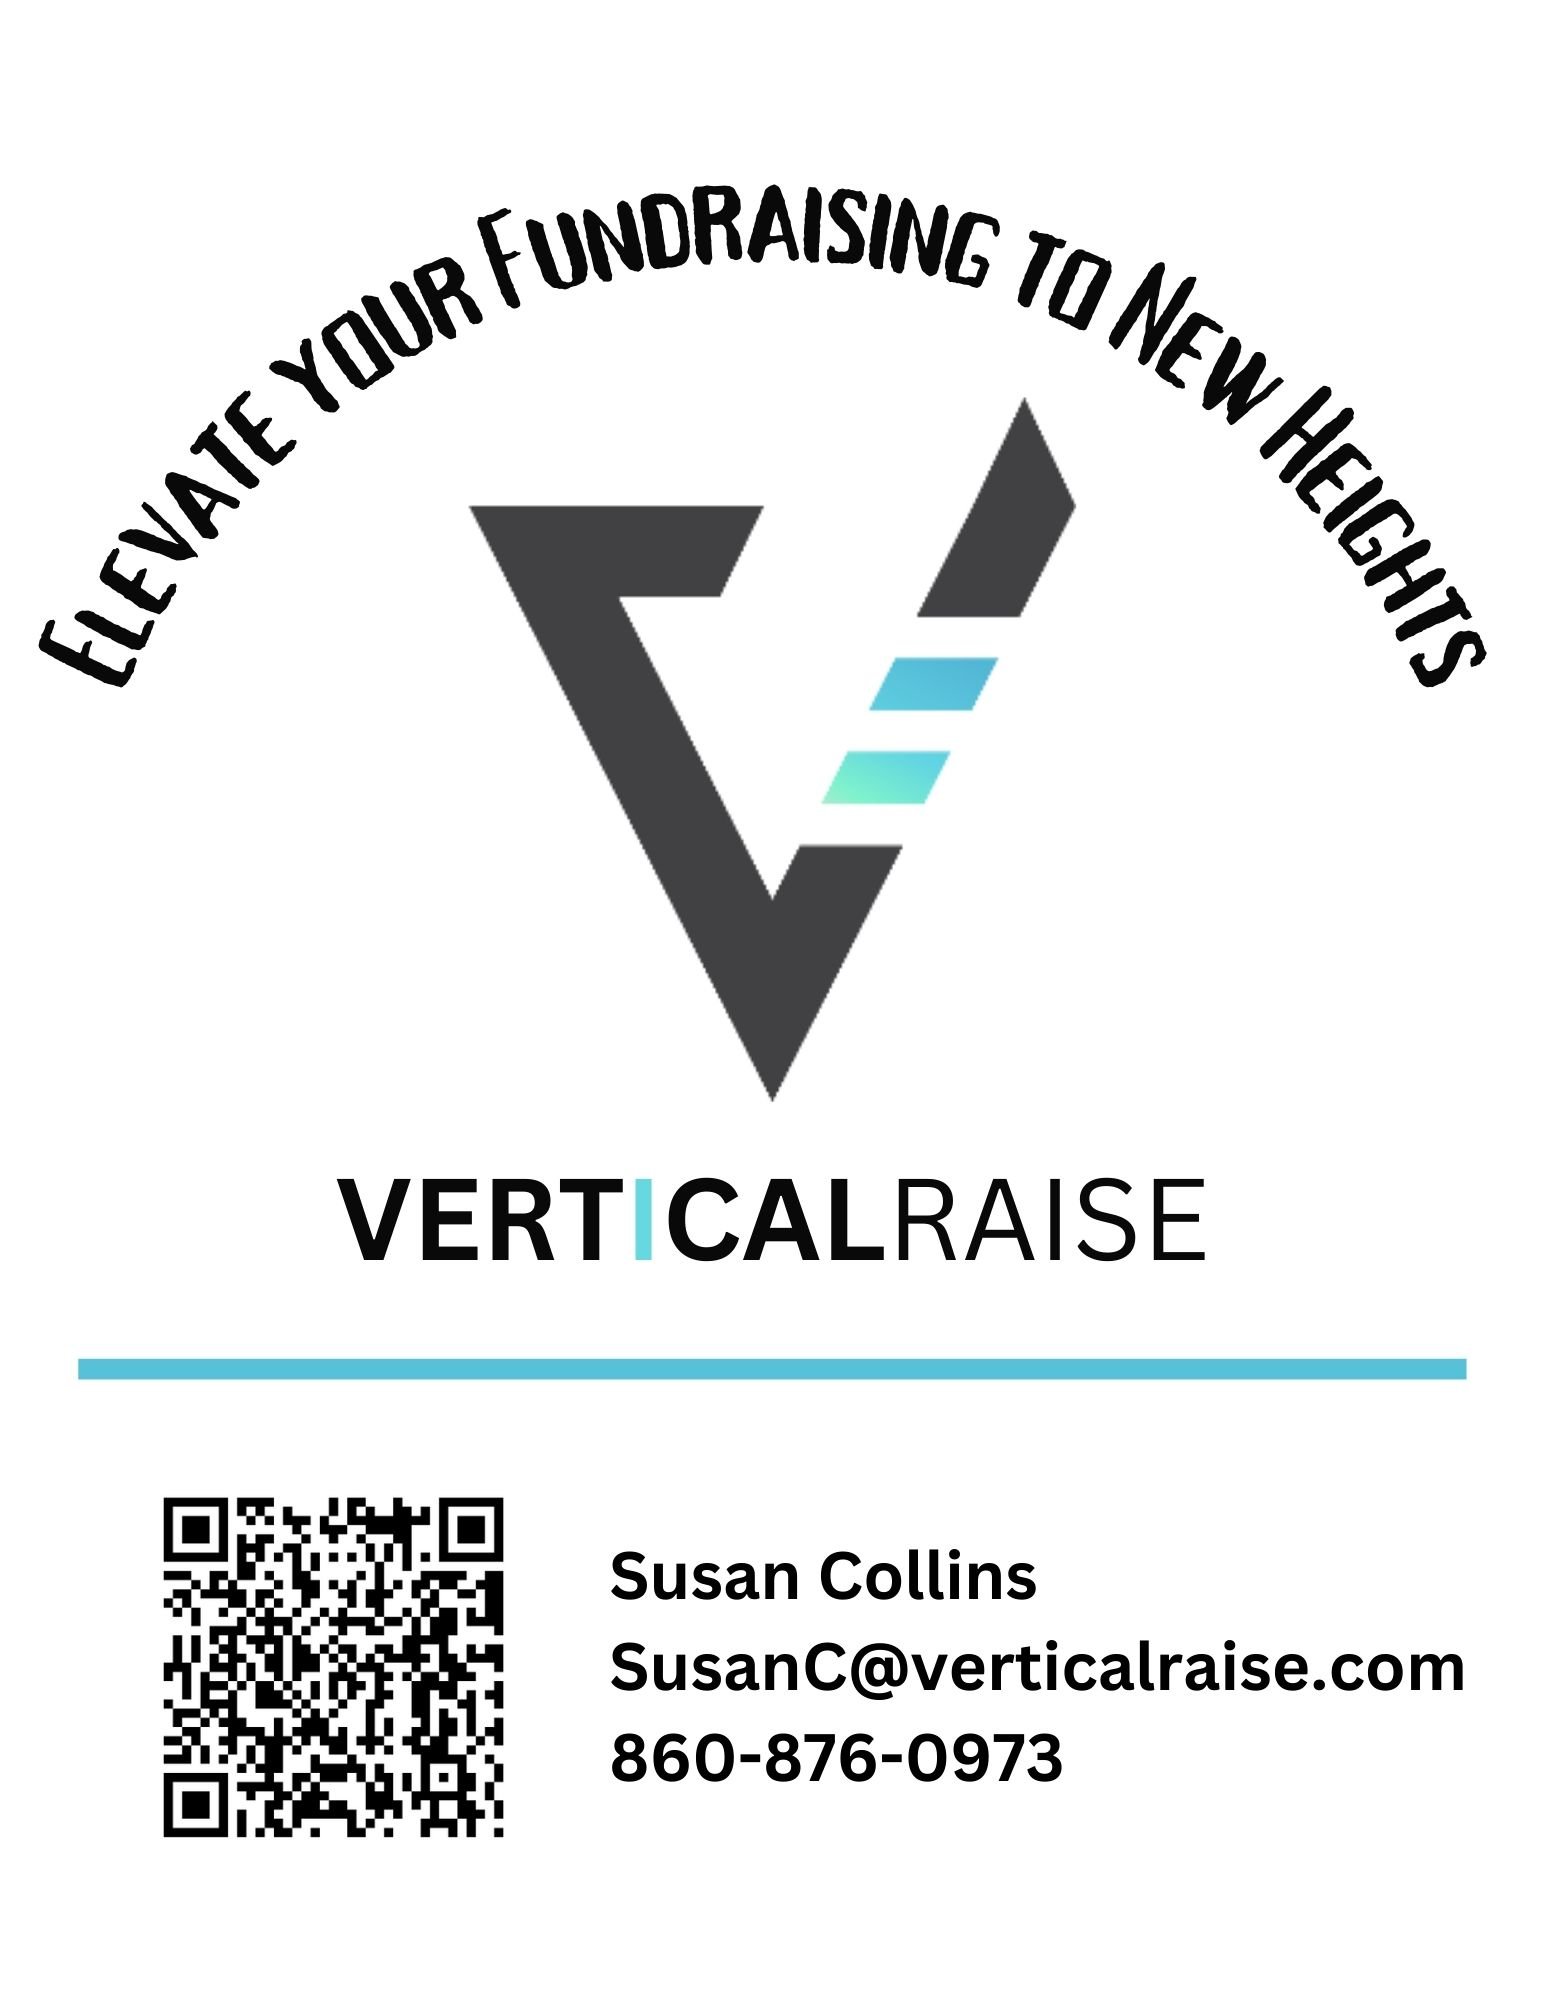 Elevate your Fundraising to New Heights with Vertical Raise - Sue Collins.jpg